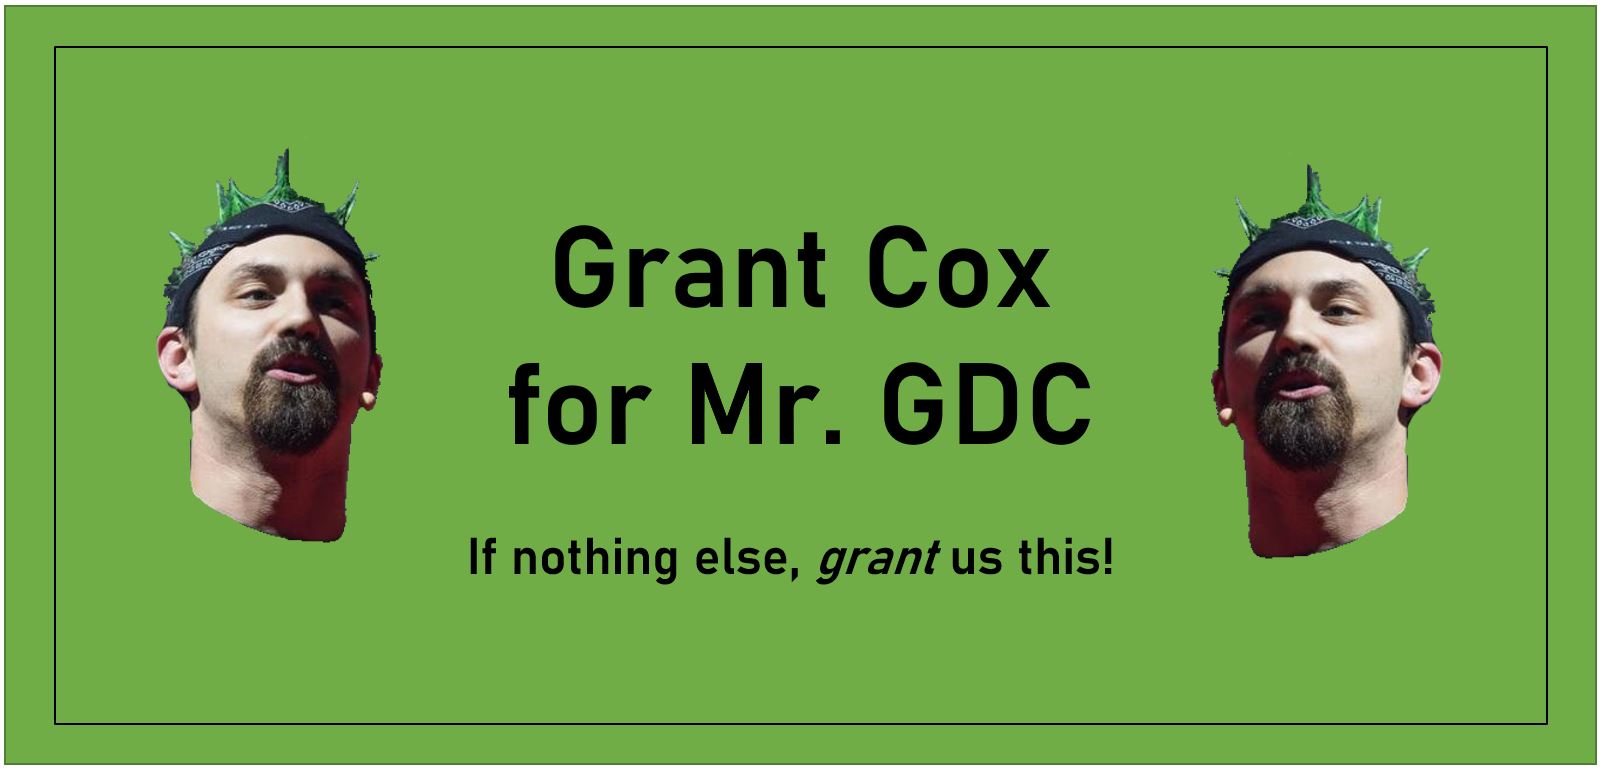 What is Grant Cox' middle name?